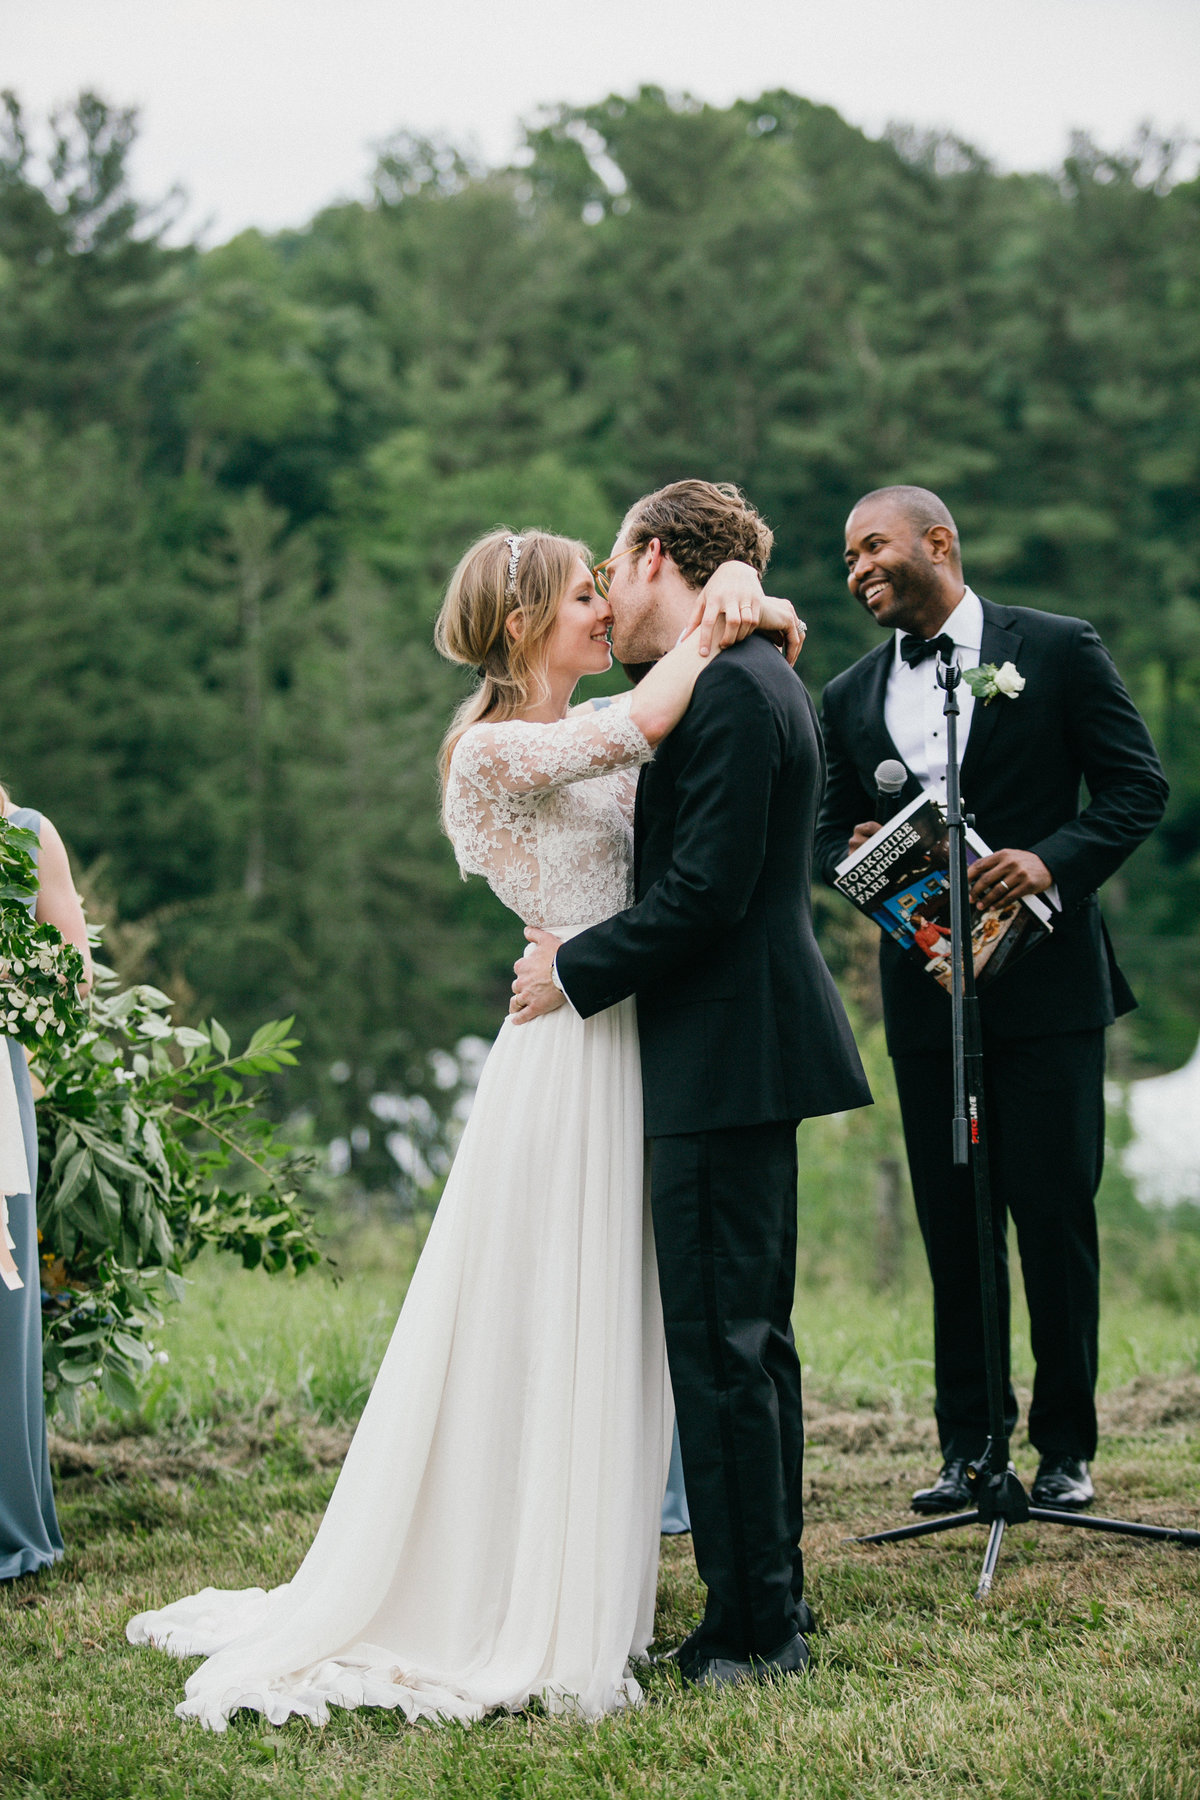 Newly wed couple share a kiss, in front of close family and friends.